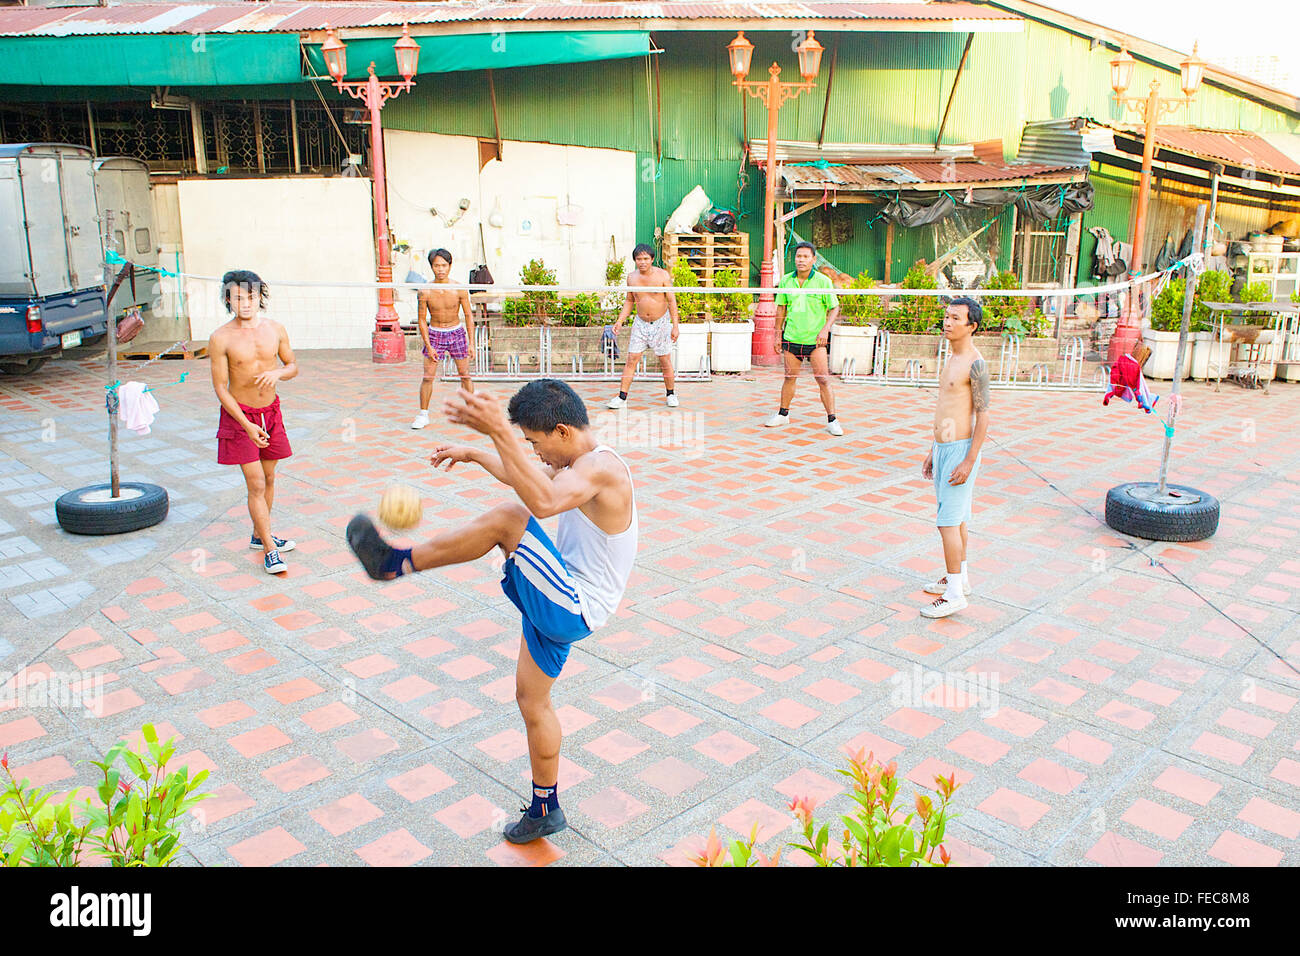 Thai men and boys playing Sepak Takraw or Kick Volleyball a volleyball game but with their feet in Bangkok, Thailand. Stock Photo